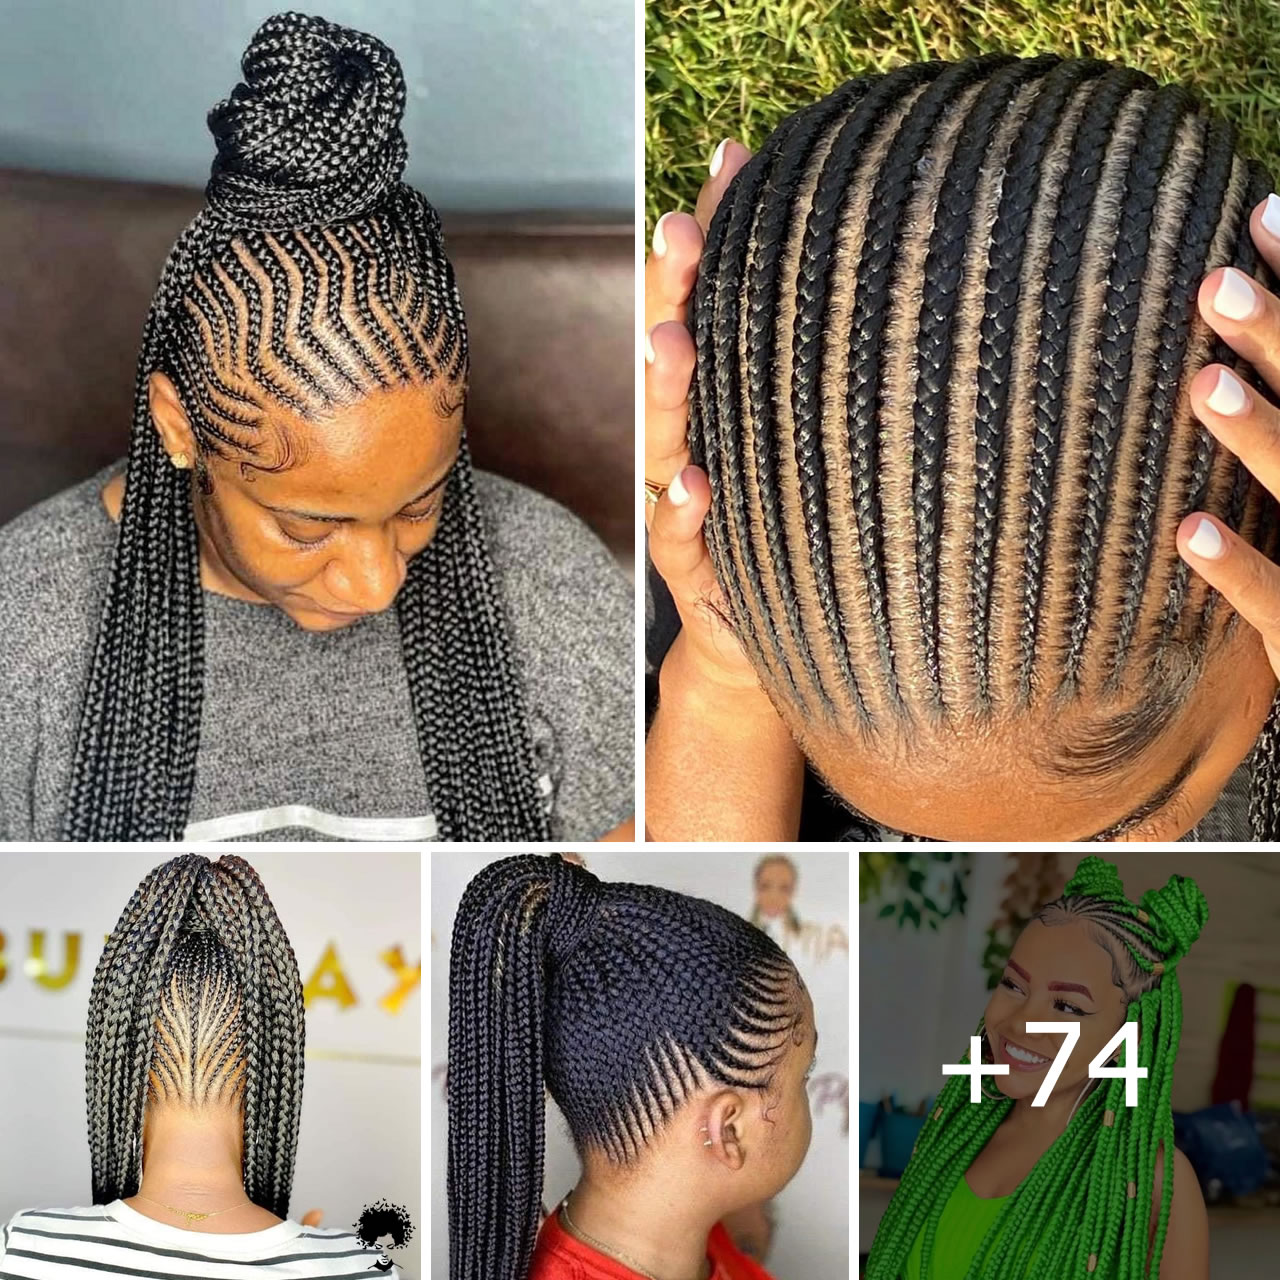 74 Stunning Braids and African Hairstyles Ladies Can’t Afford to Miss!